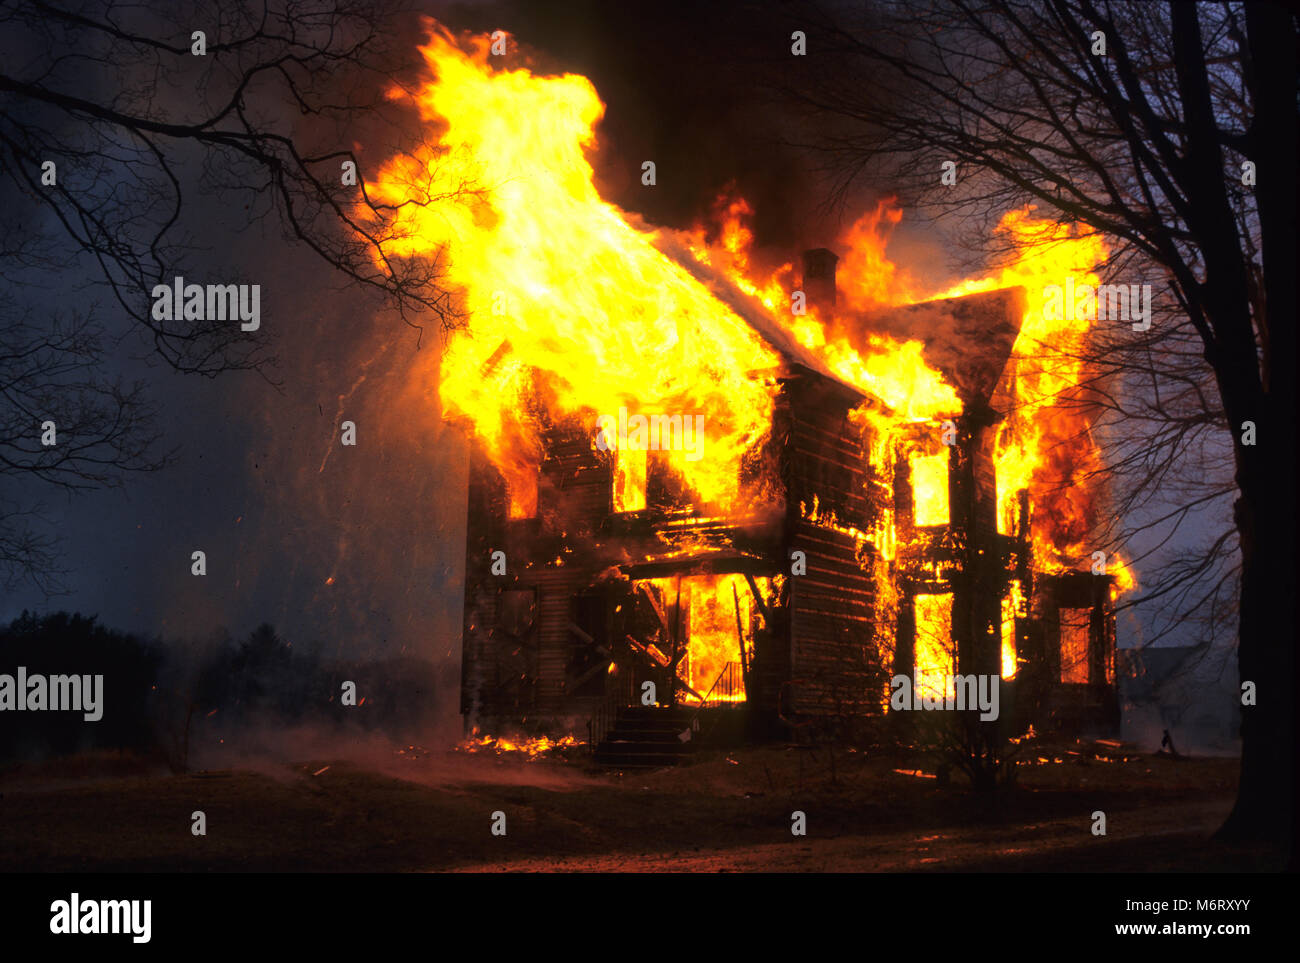 An abandoned building fully involved in flames Stock Photo